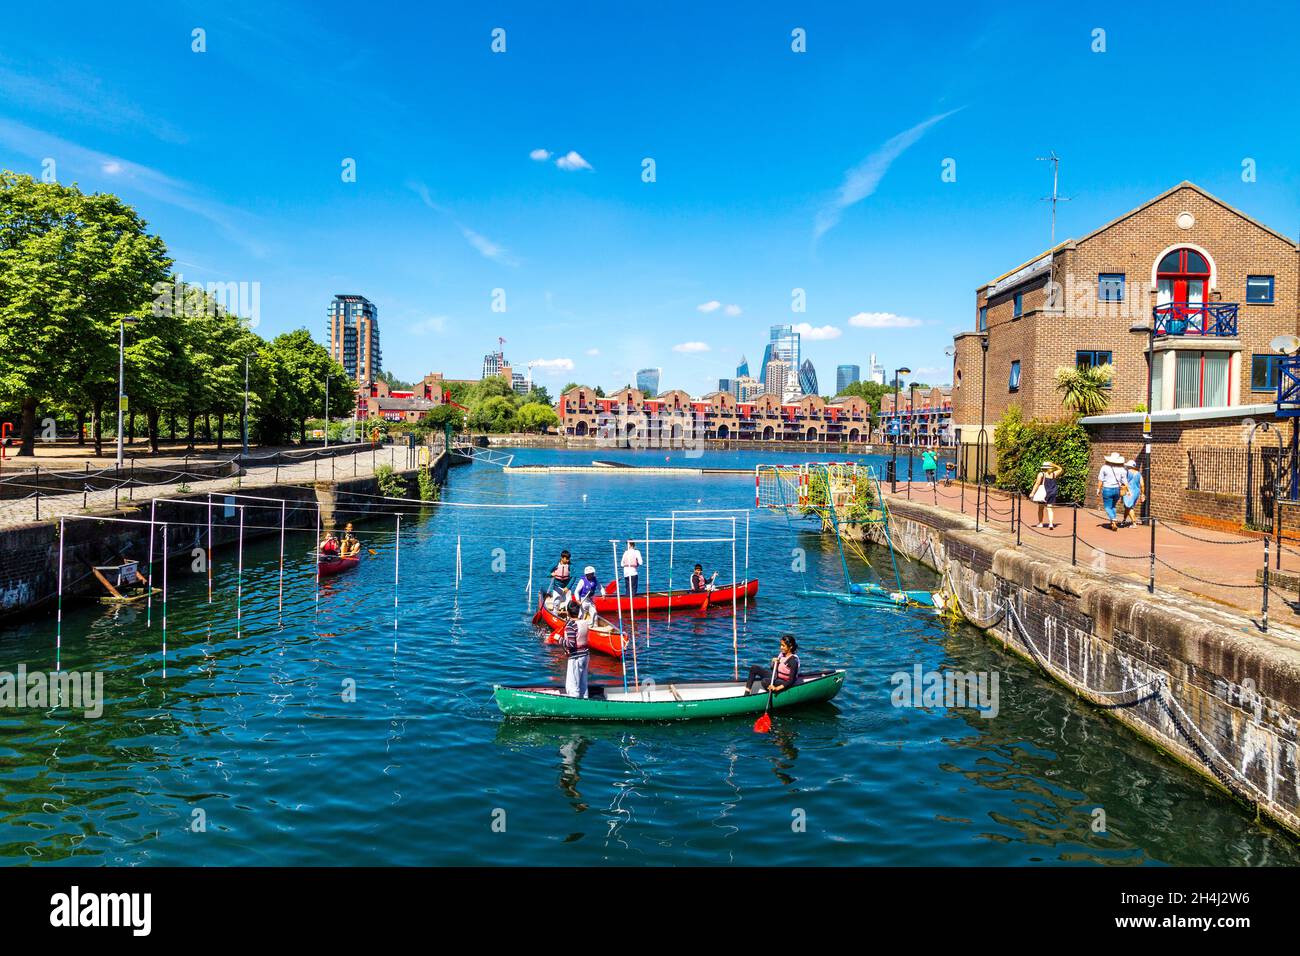 People canoeing in a canoe slalom at the Shadwell Basin Outdoor Activity Centre, London, UK Stock Photo